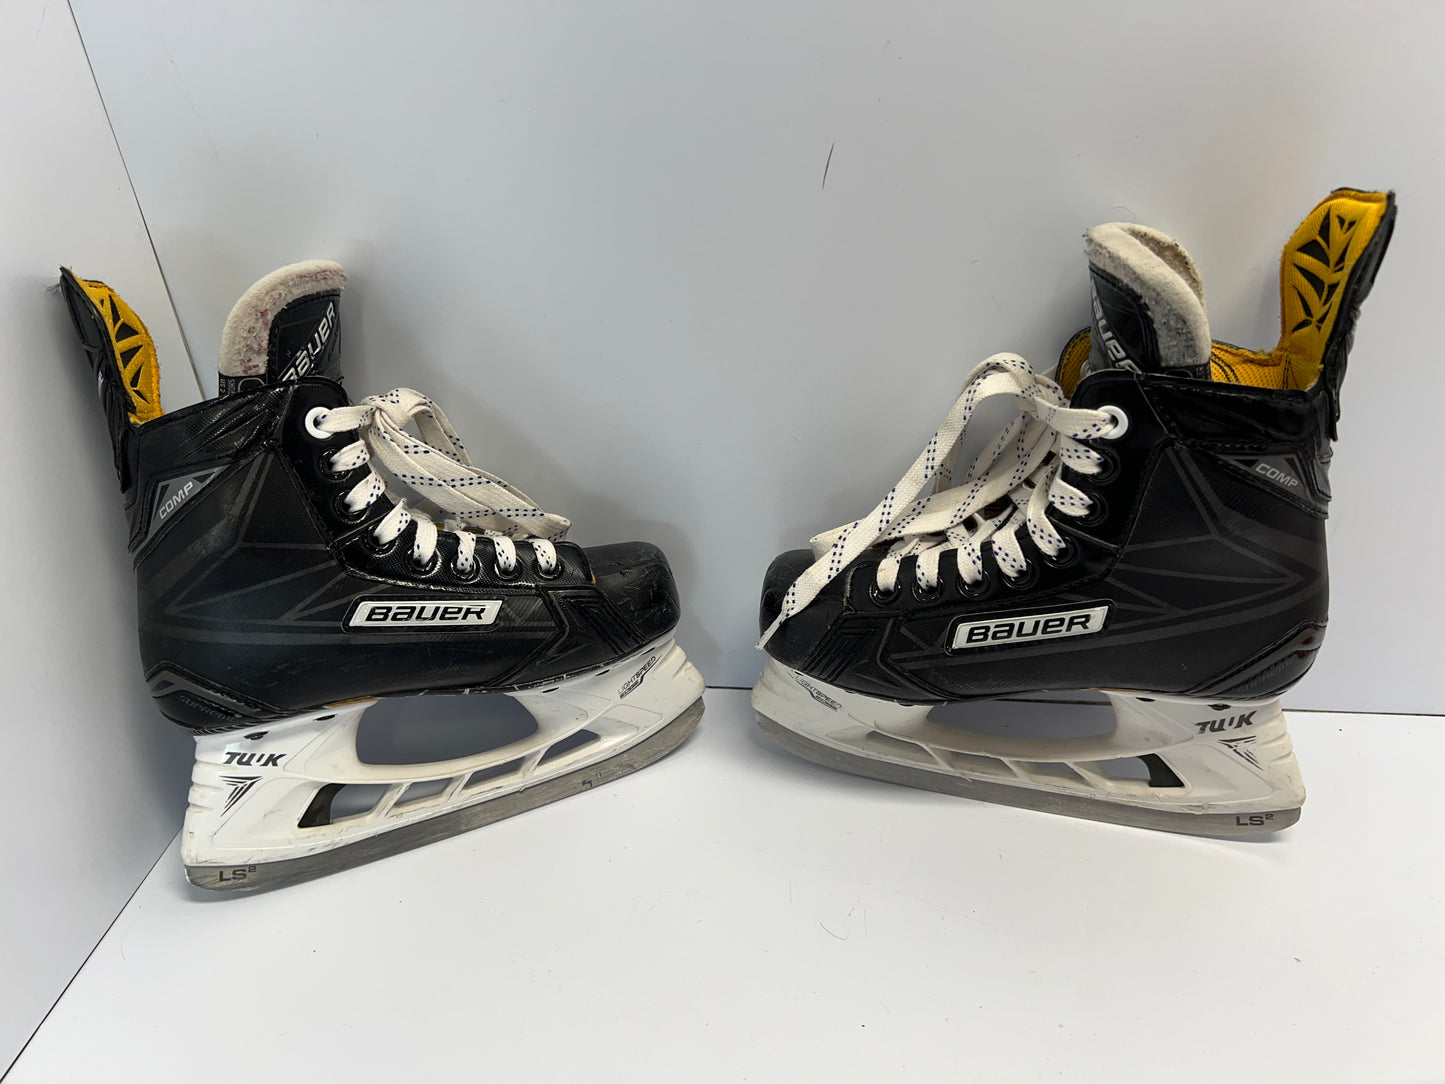 Hockey Skates Child Size 2 Shoe Size 1 Skate Bauer Comp With LS 2 Special Blades